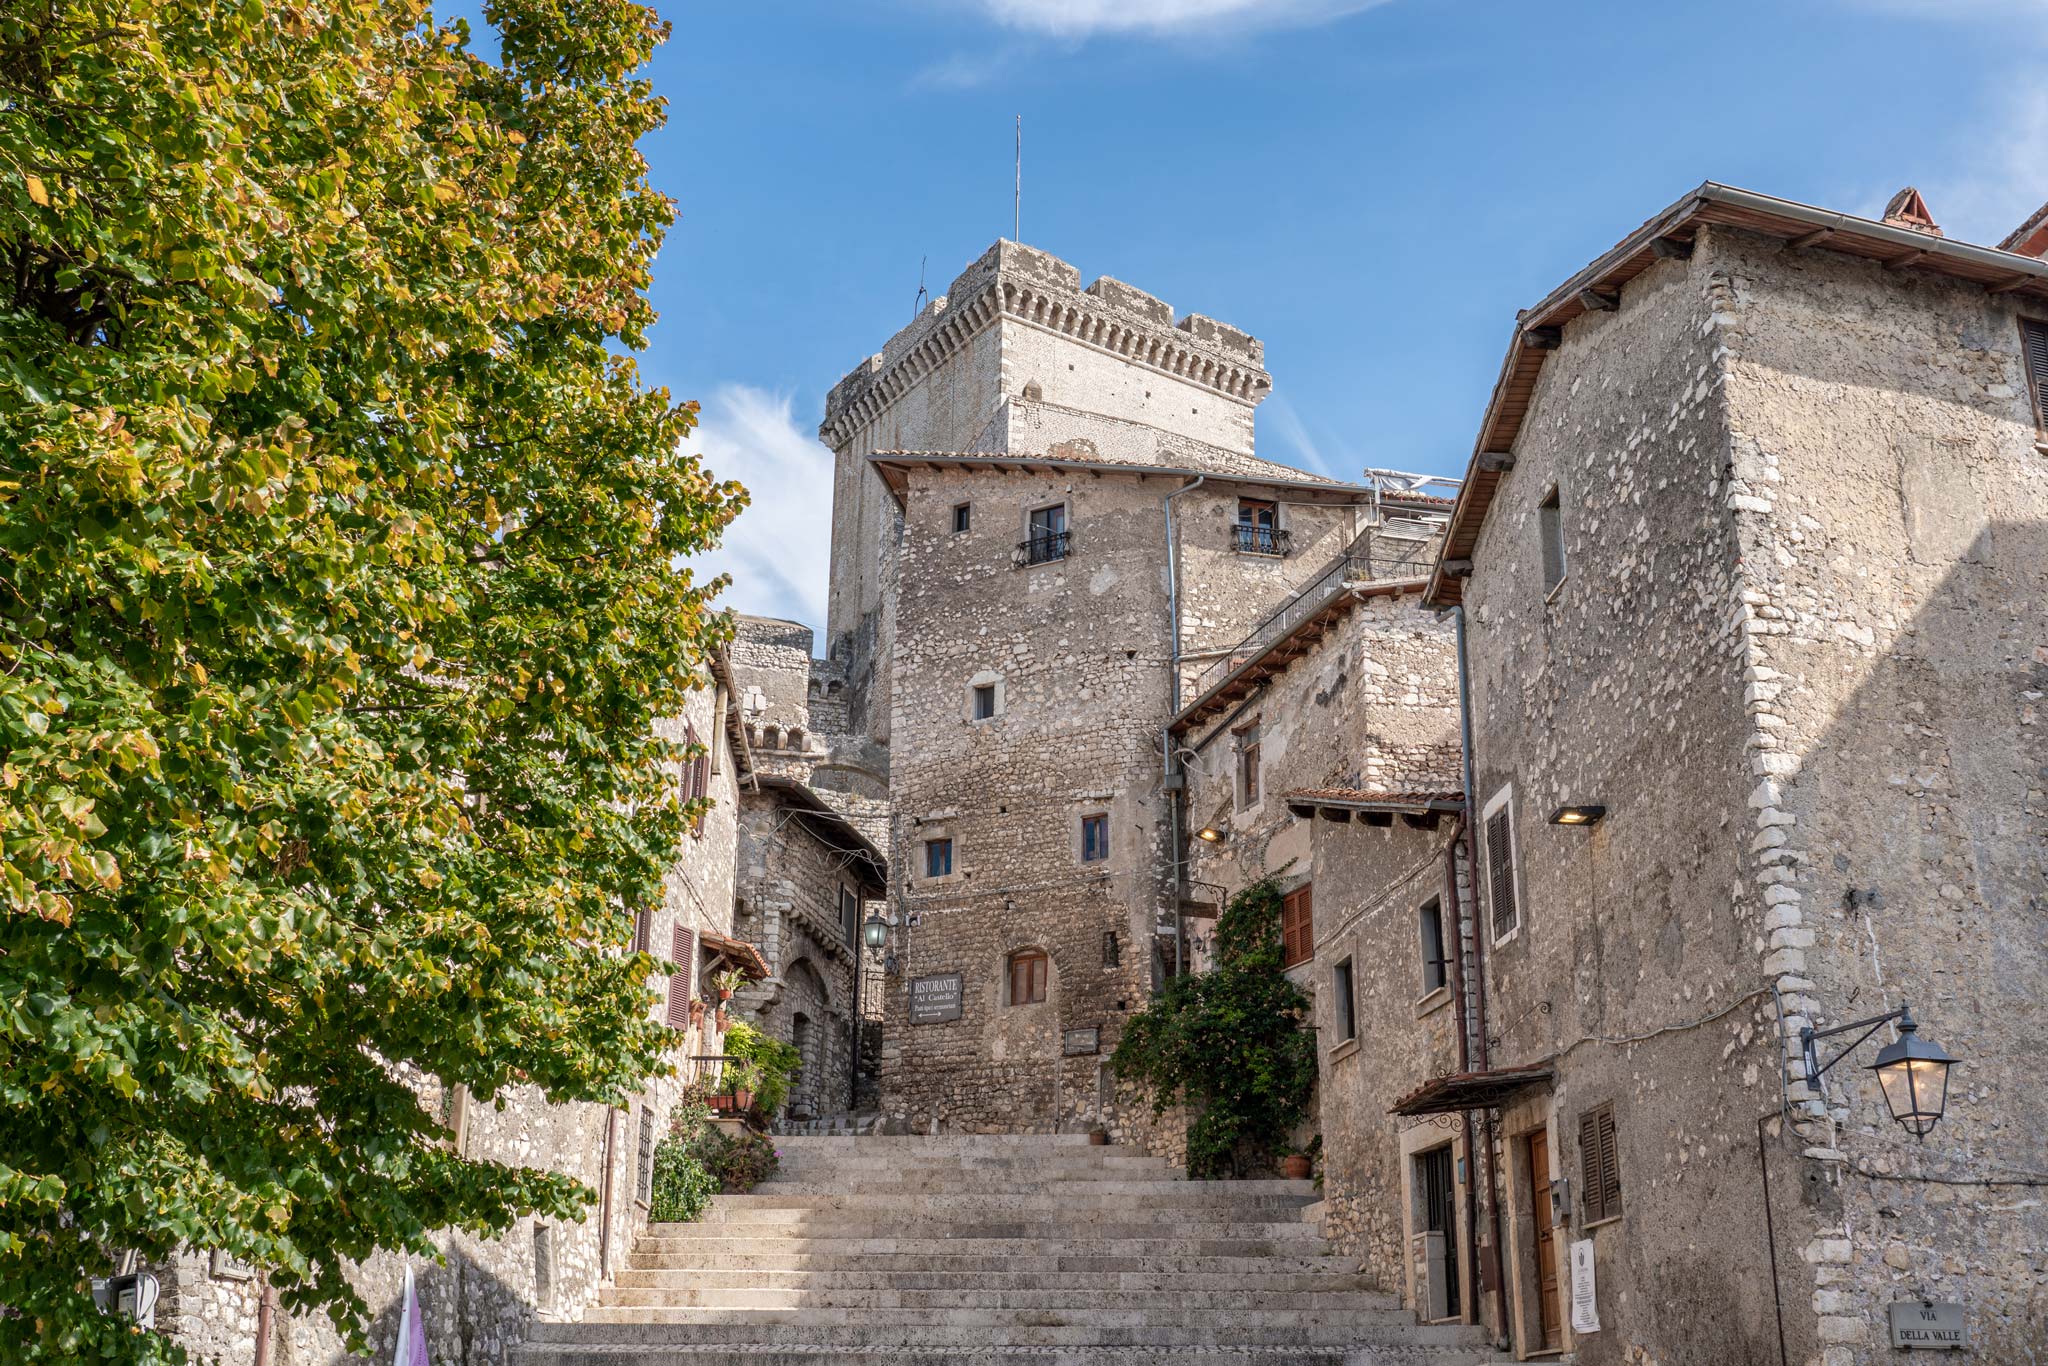 Medieval Sermoneta and the castle, a possible day trip from Rome